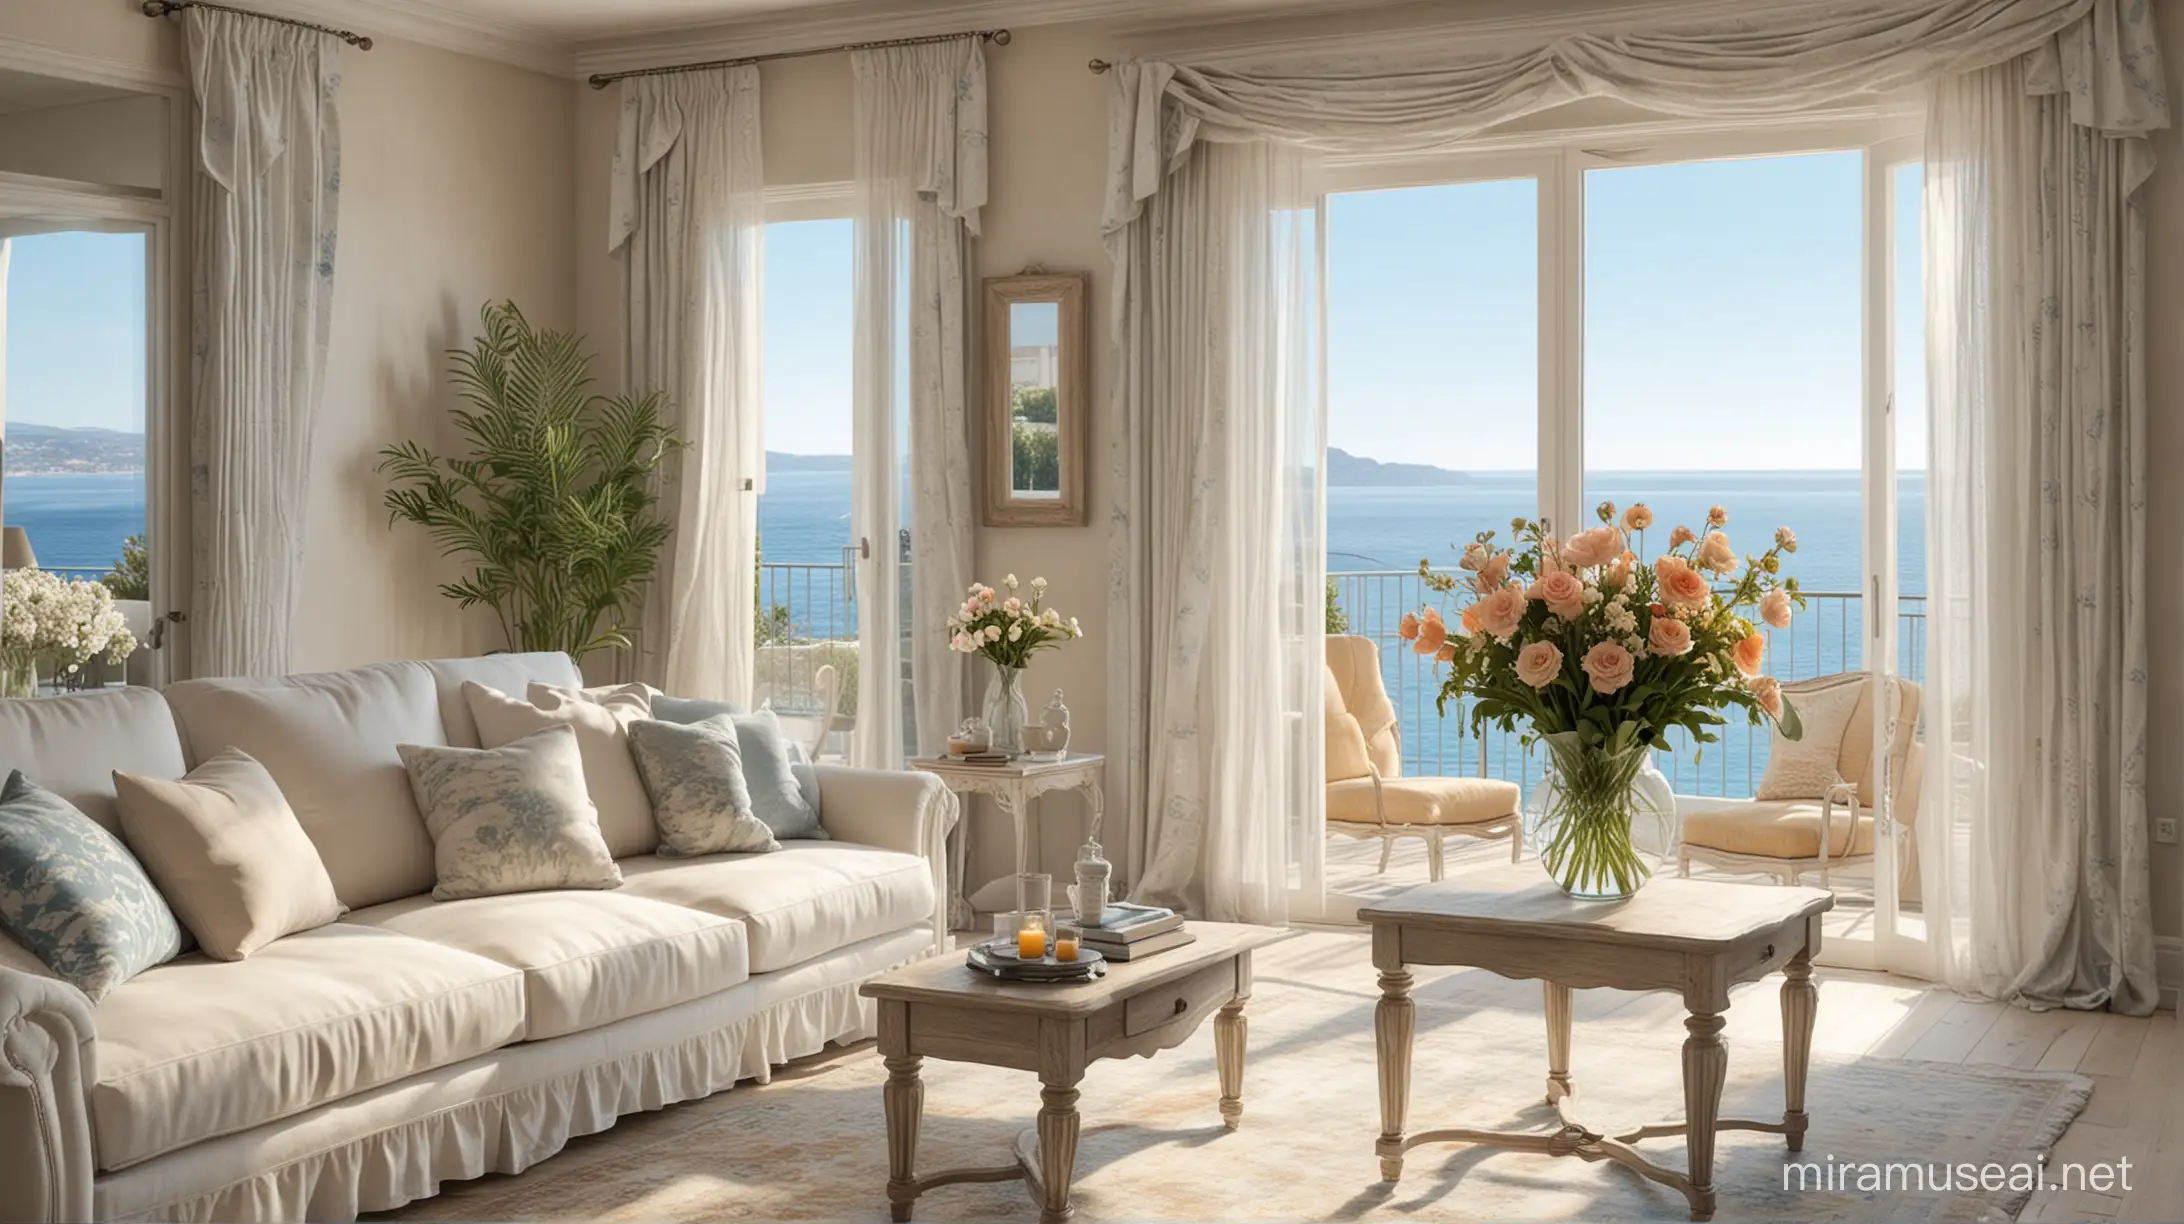 /imagine an artist rendering of an inside view overlooking the ocean on the french riviera with shabby chic decor living room furntiure with a clear glass flower vase with fresh cut flowers and french country curtains